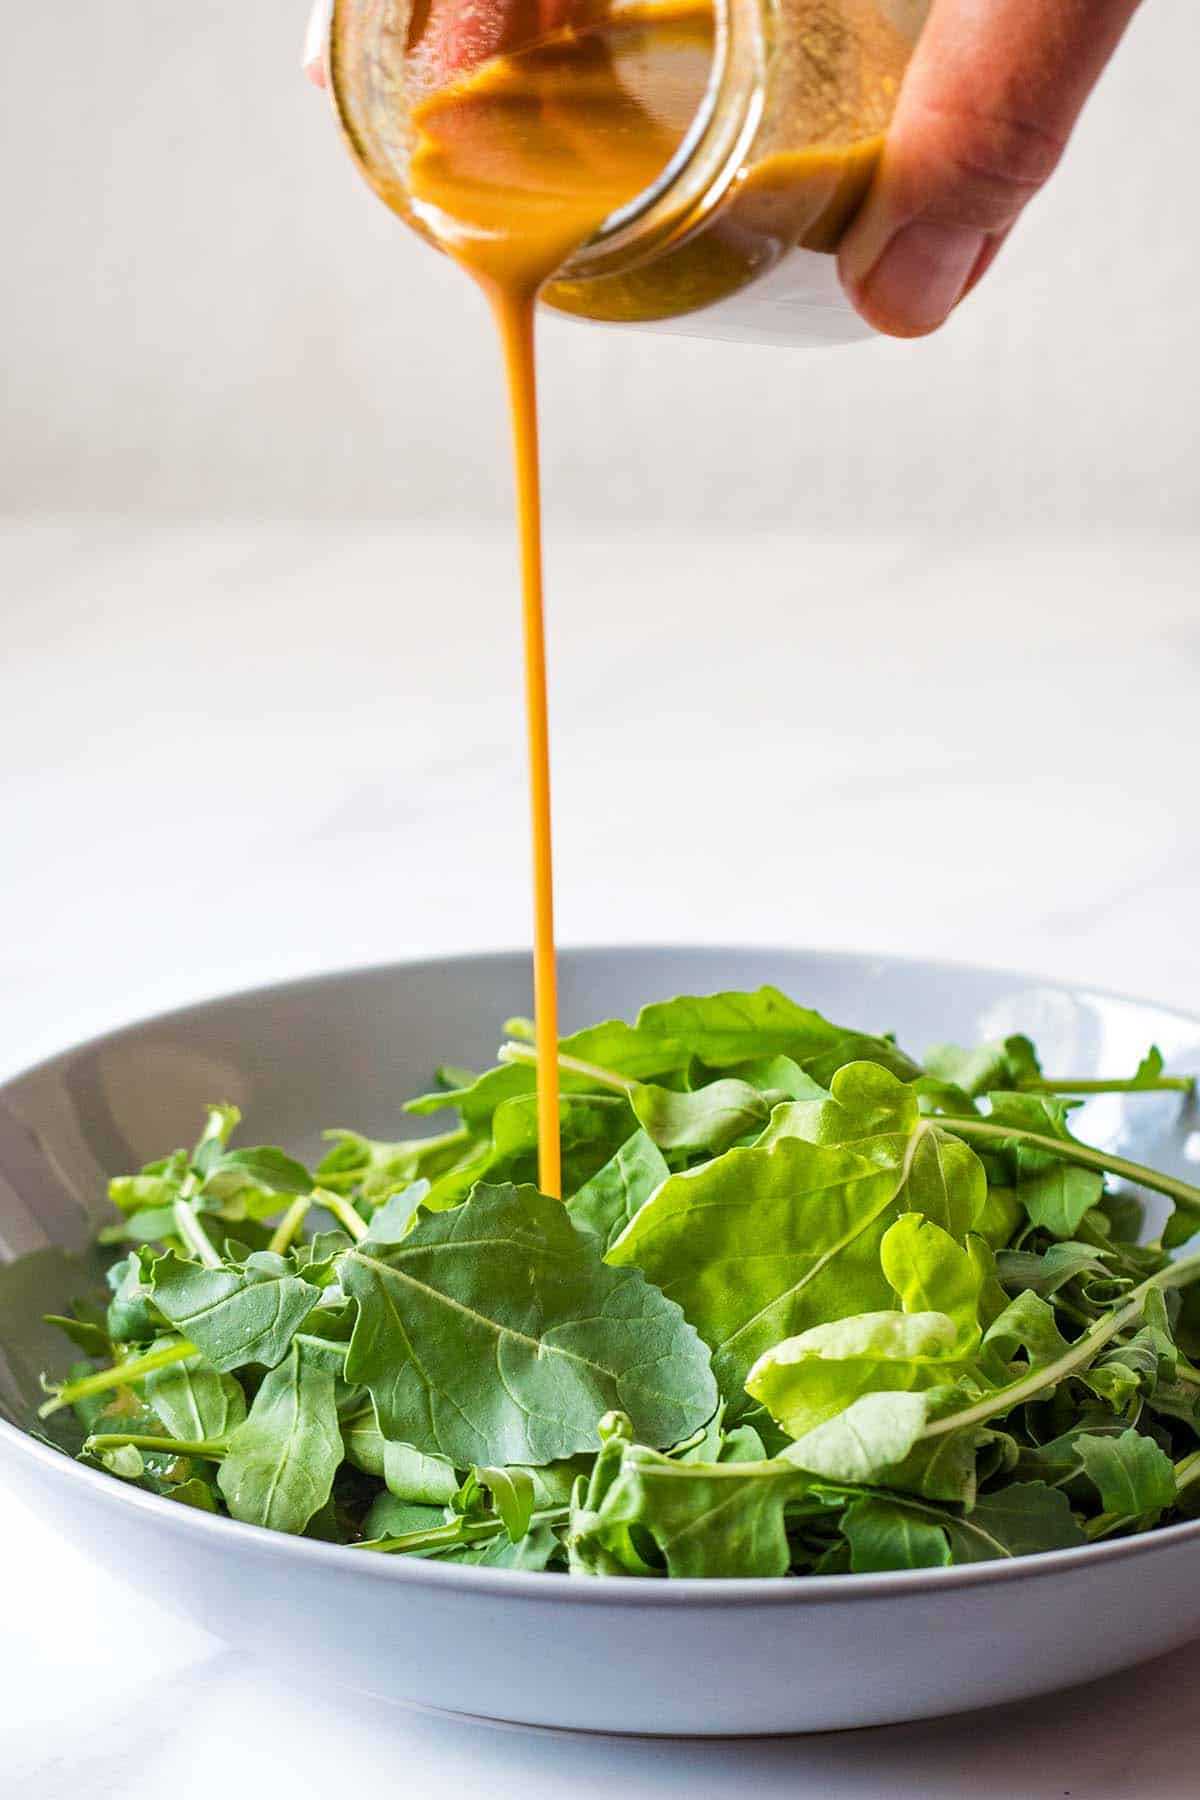 homemade balsamic dressing being drizzled on arugula leaves